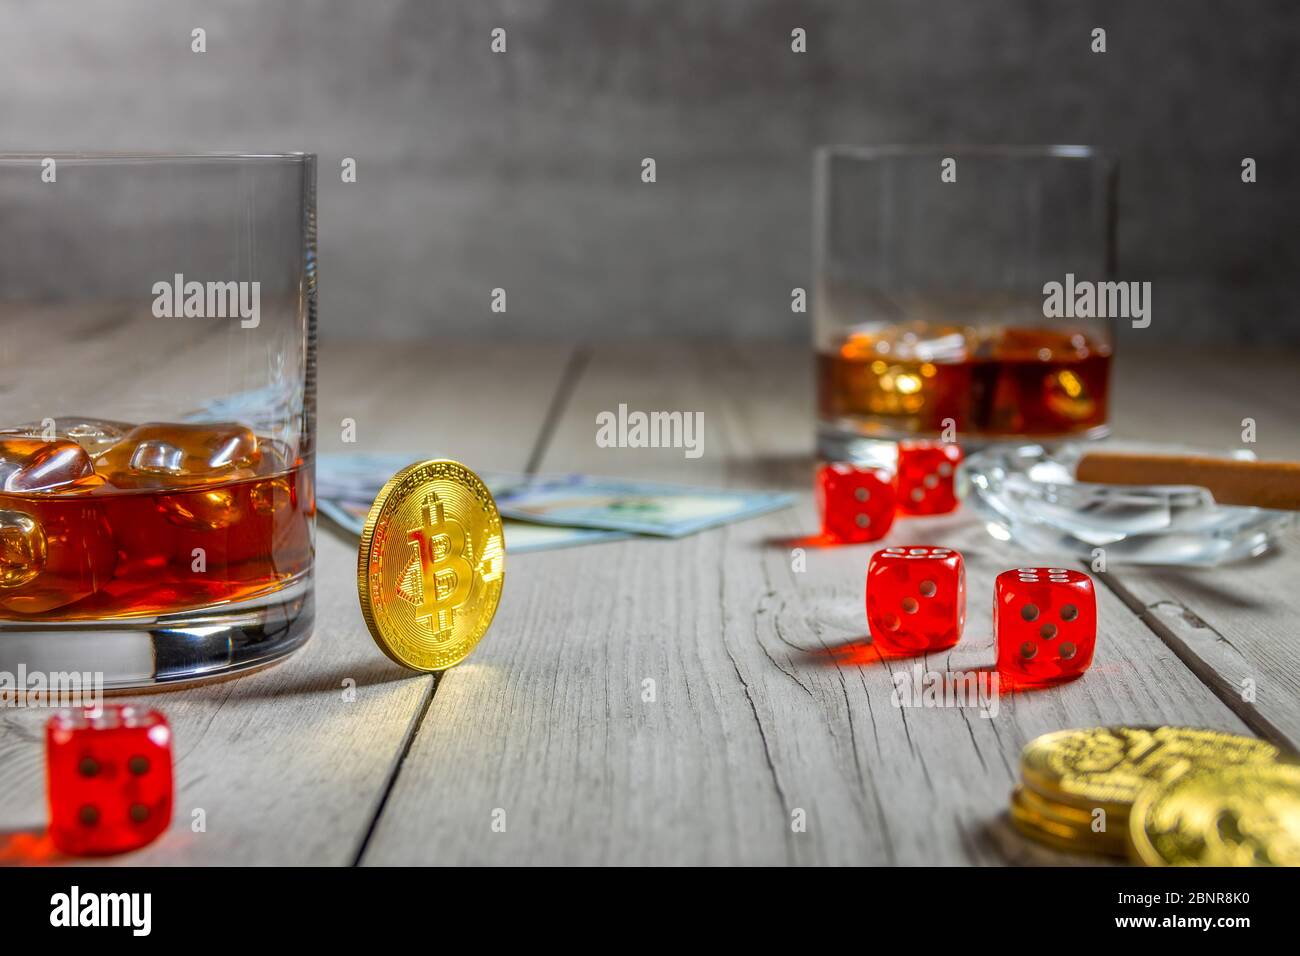 Rustic wooden table. Two glasses of whiskey with ice cubes and a cigar in an ashtray. Dice and dollar bills. Few bitcoin coins Stock Photo